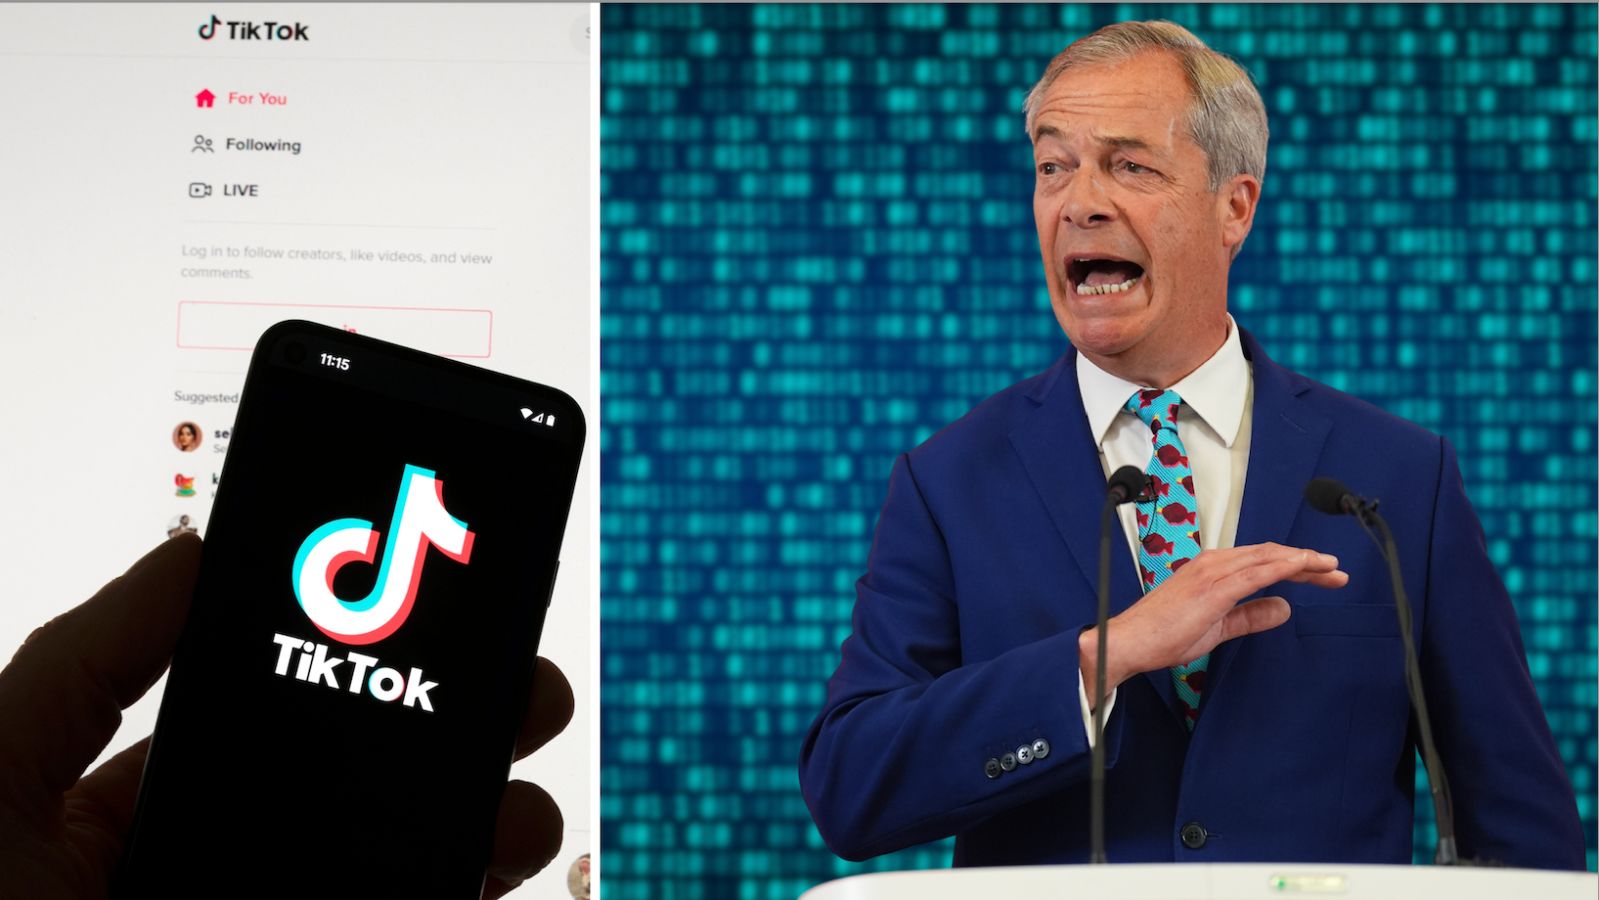 Suspicious accounts ‘following Nigeria’ are being used to push pro-UK reform content on TikTok.